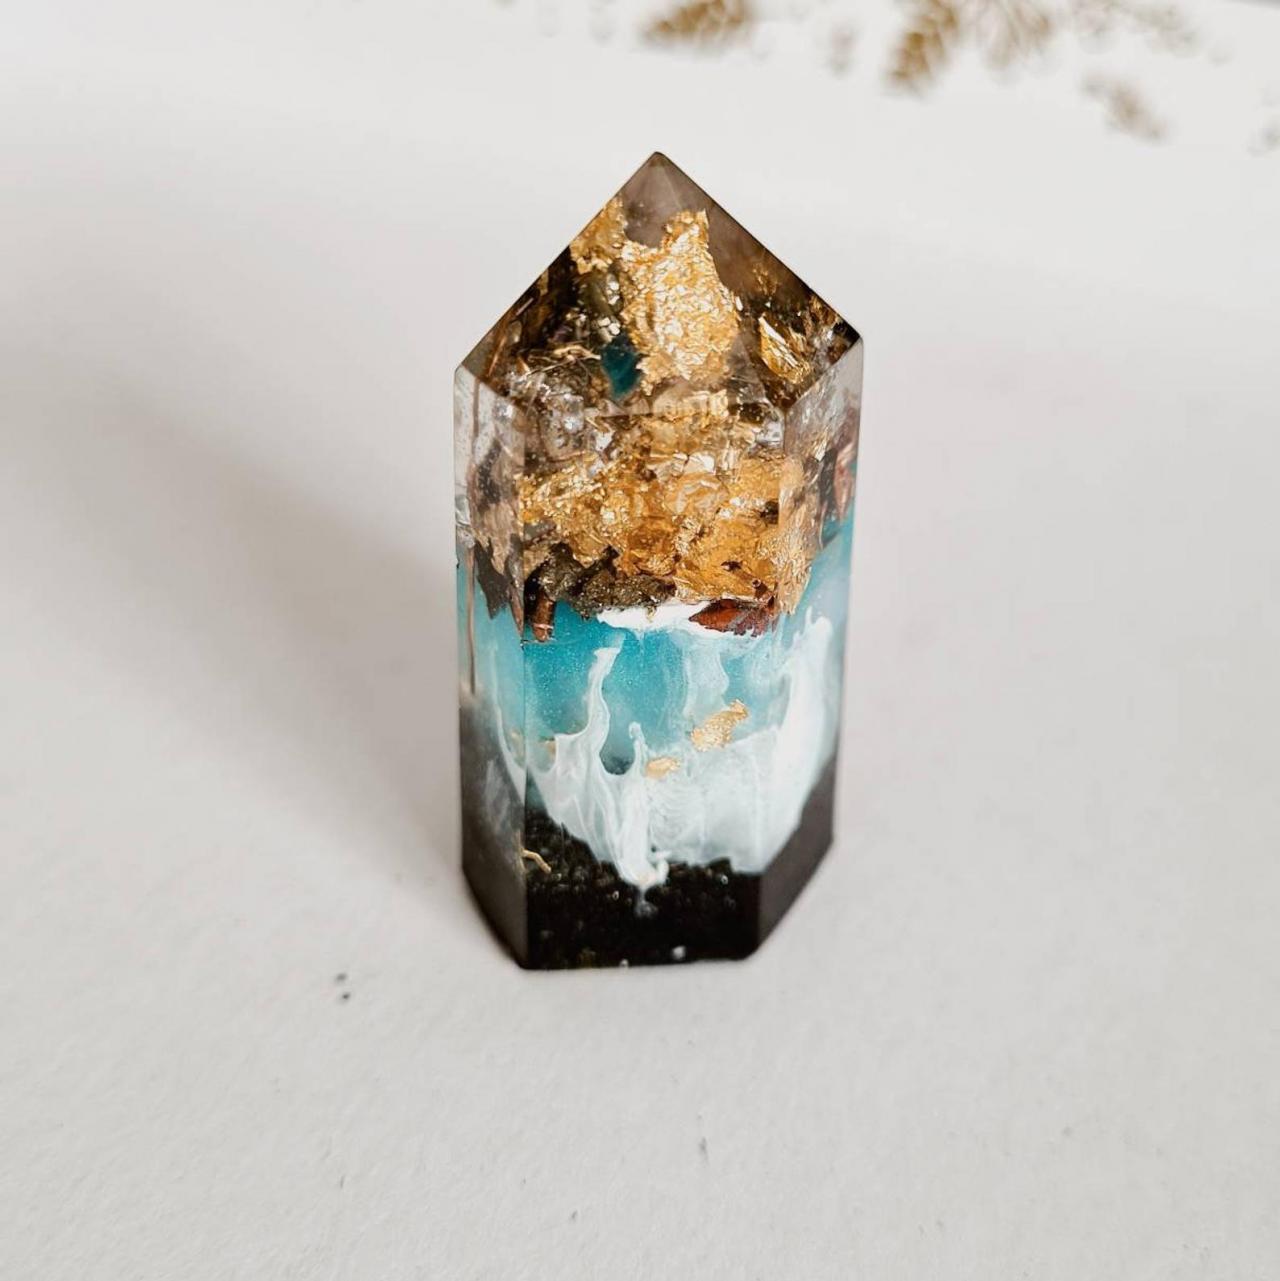 Pointy Orgone Energy Tool with Copper Coil, Crystals, Metals/ quartz crystal/ EMF protection/ Healing Energies